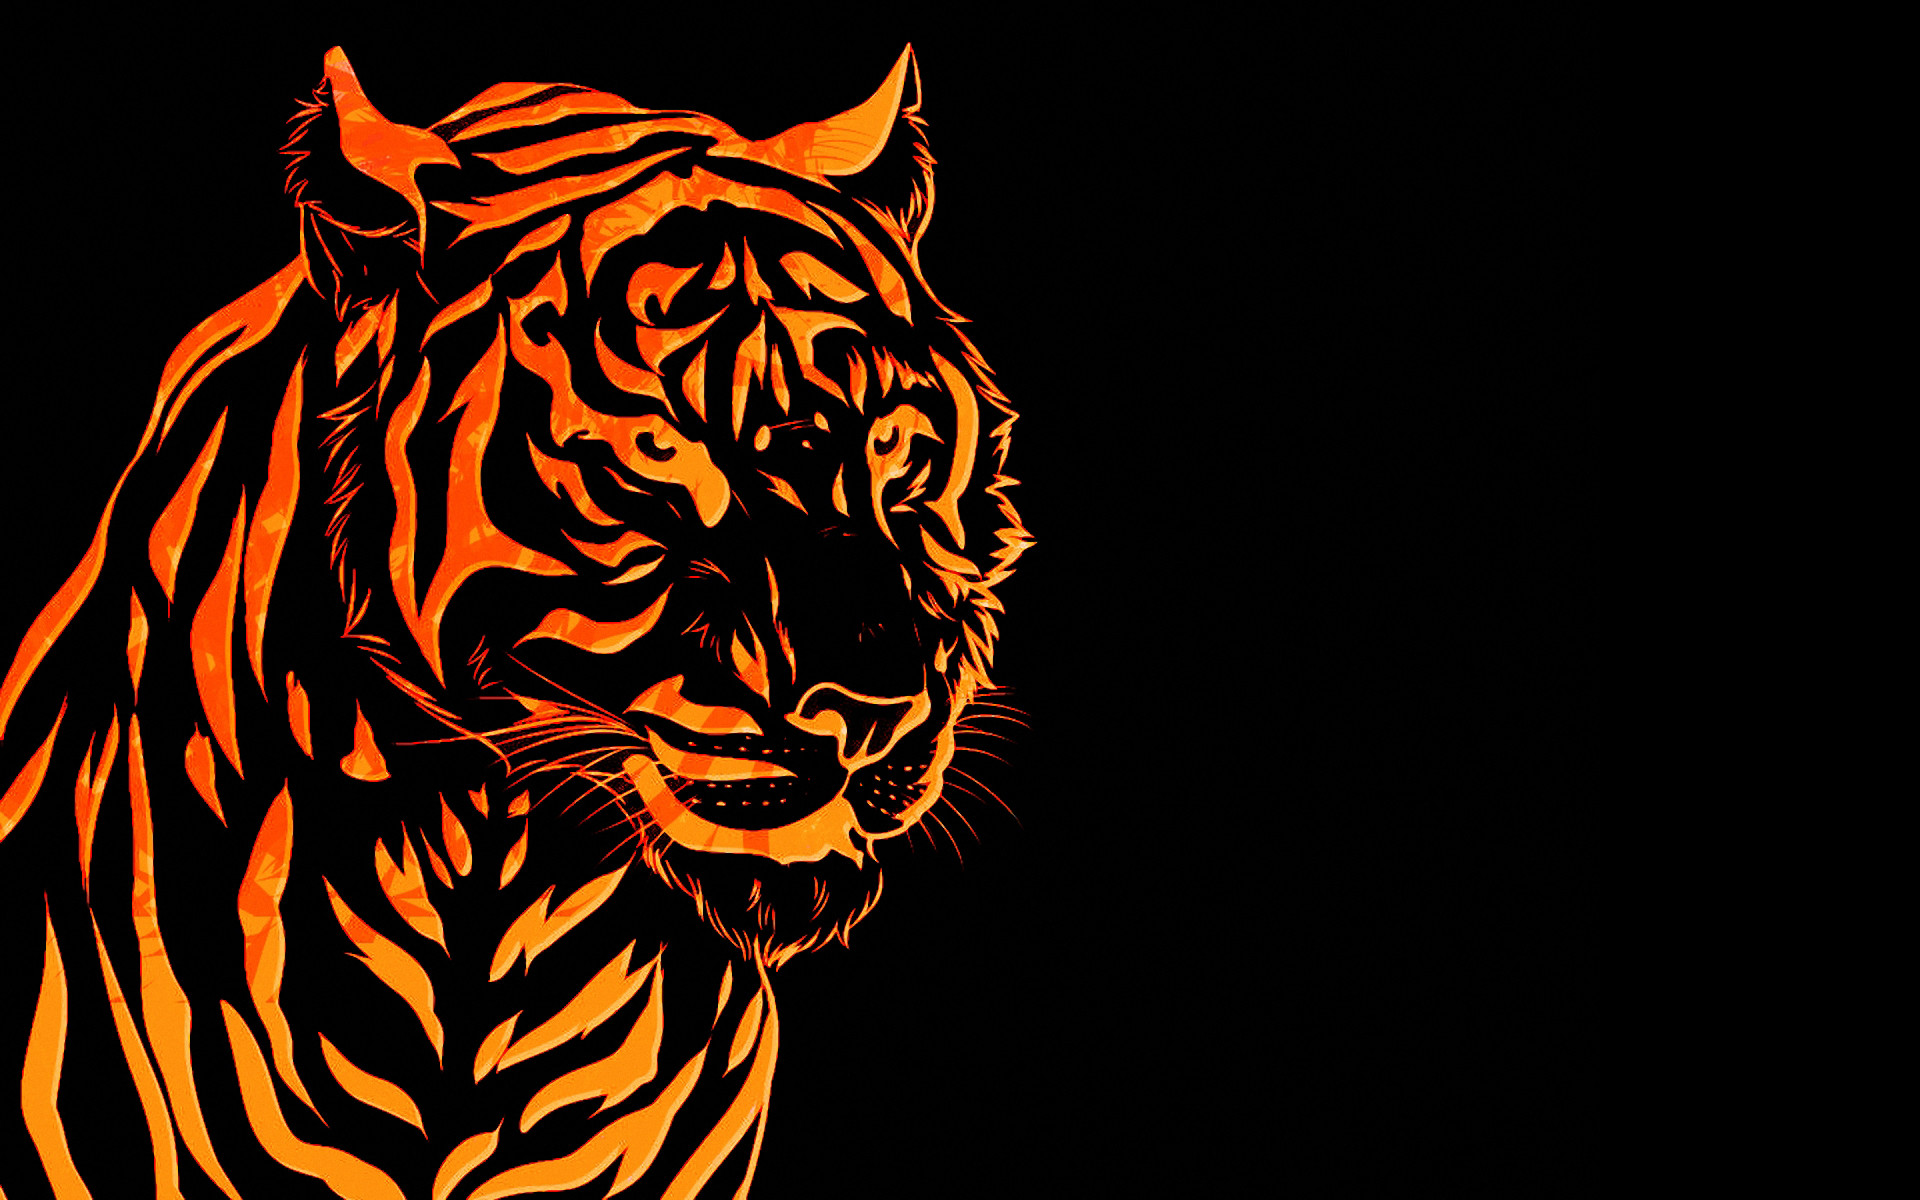 For those who love tigers I made this as a pc wallpaper , drawn with photoshop. Please give me feed back if you like this c Fire Tiger wallpaper